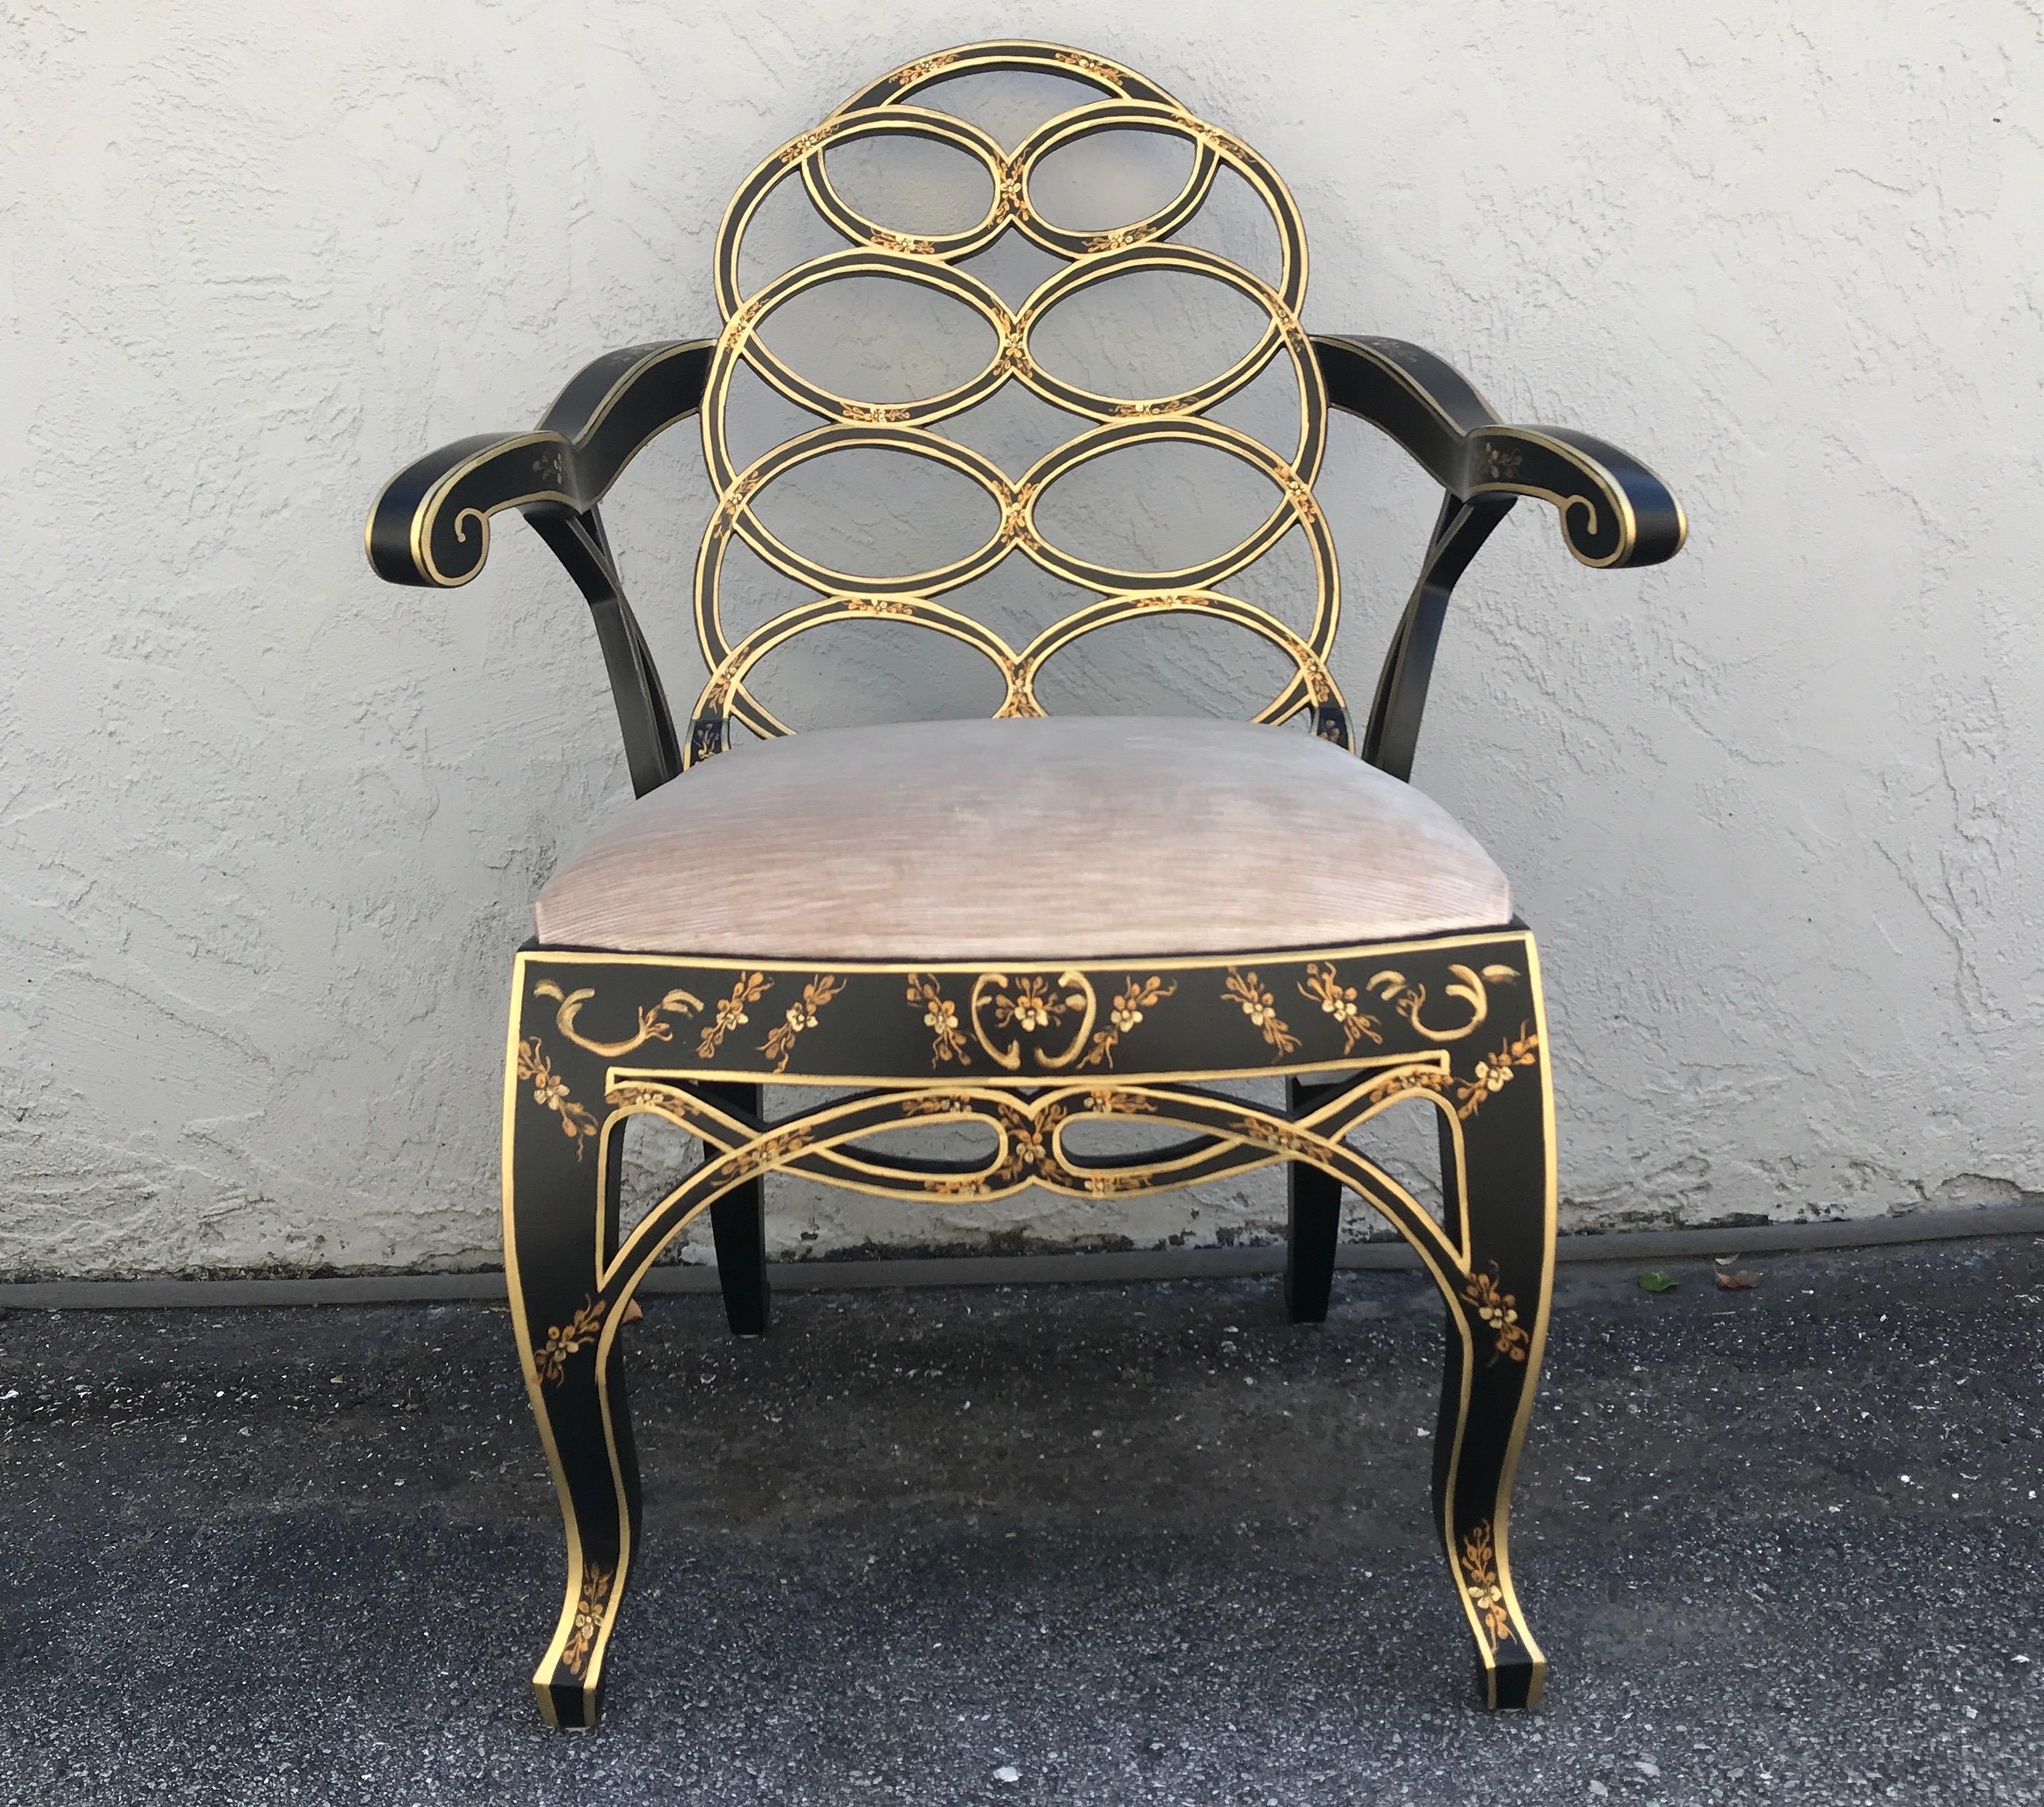 Black & gold painted chinoiserie armchair with champagne velvet seat & cut out swirled back.